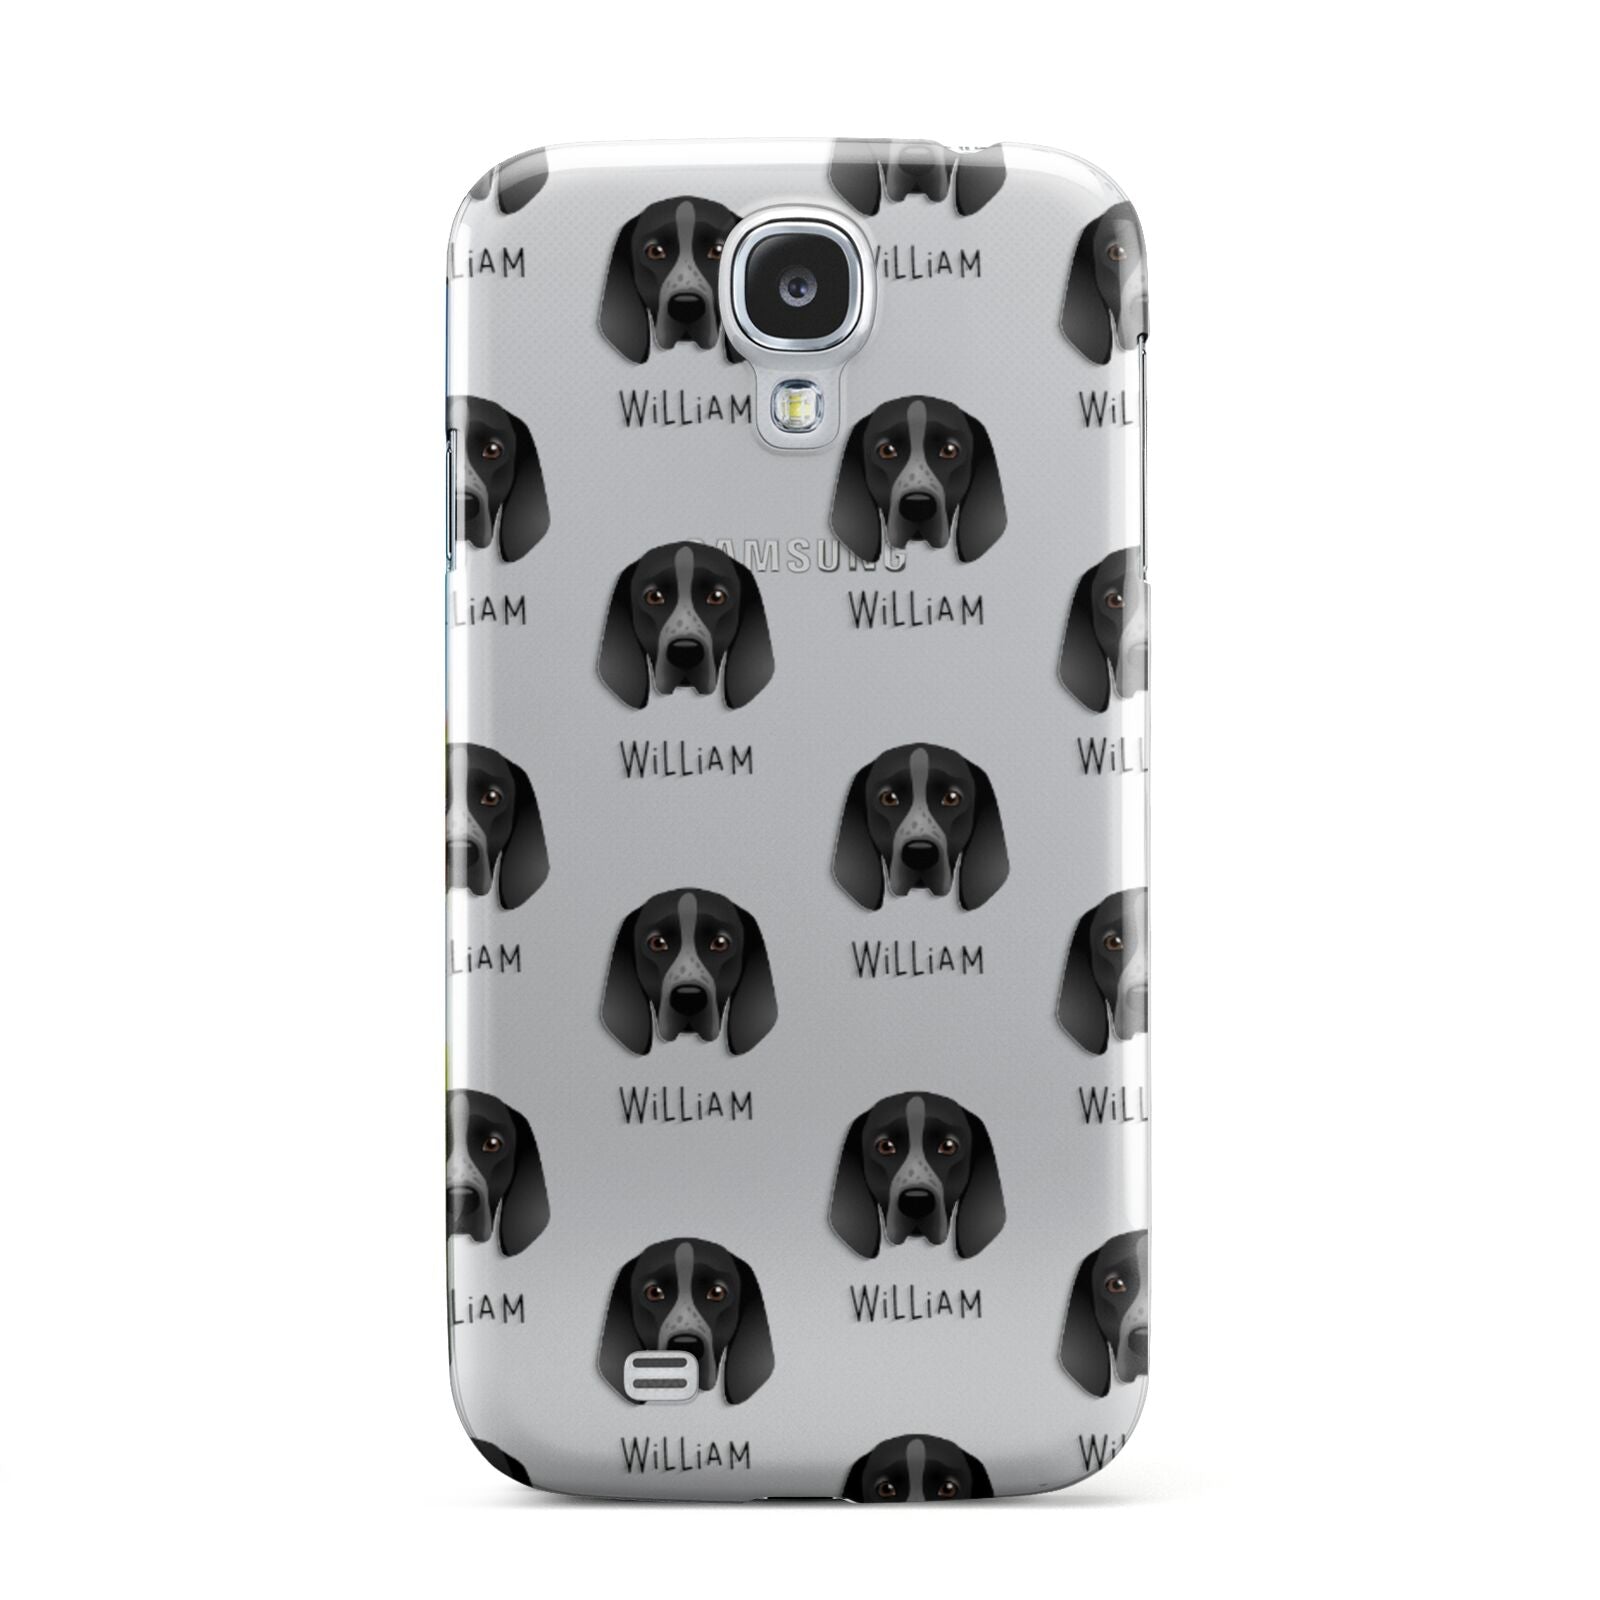 Braque D Auvergne Icon with Name Samsung Galaxy S4 Case